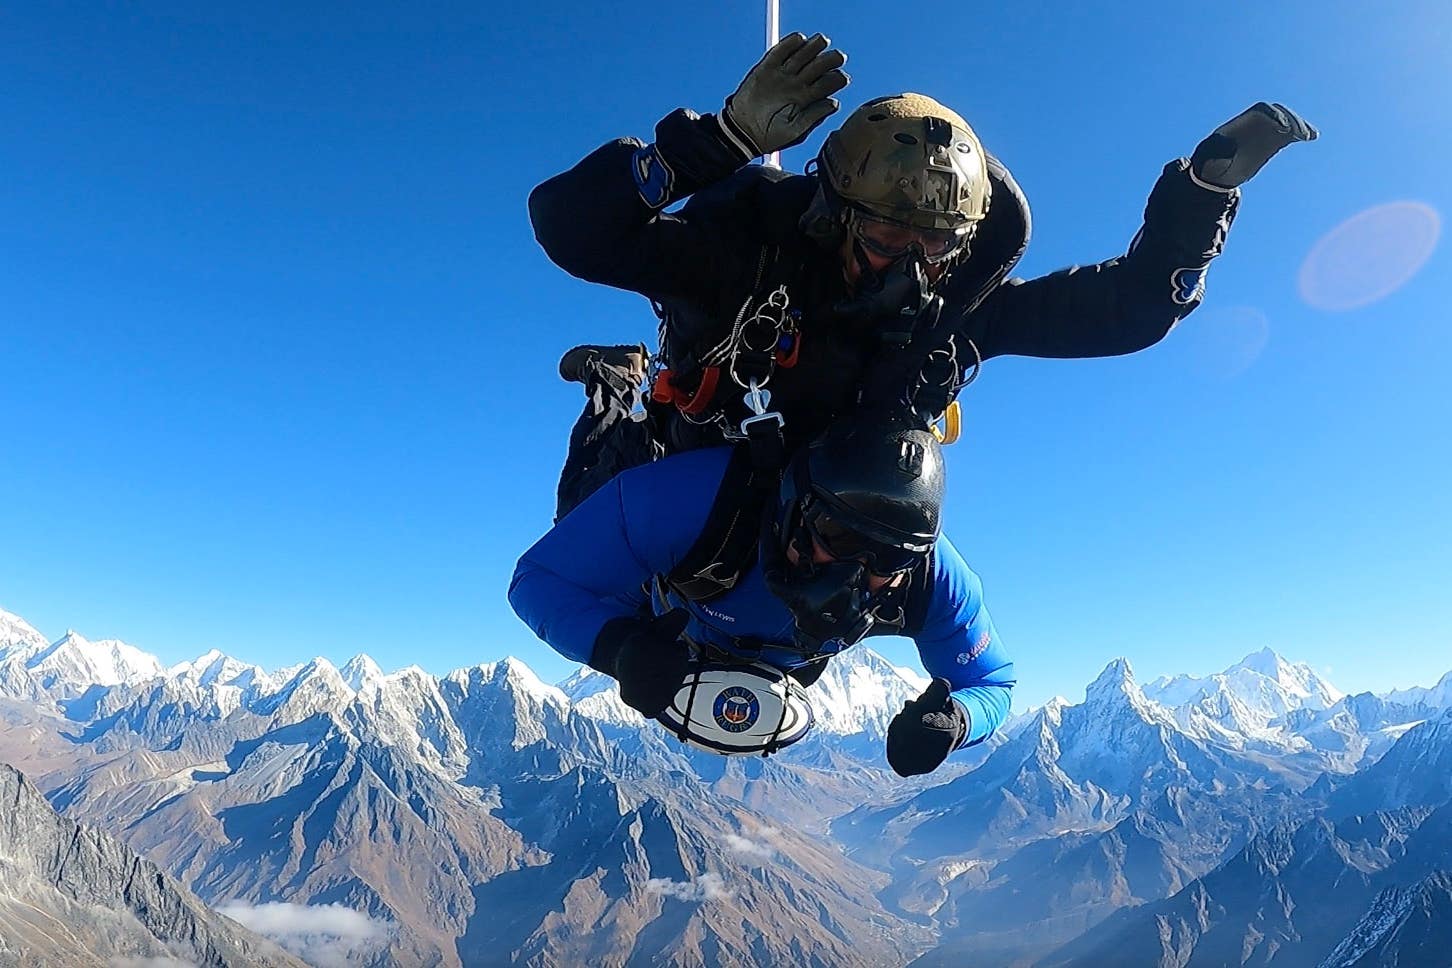 Former Bath Rugby player, Iestyn Lewis, completes a 24,000 foot charity skydive while holding a rugby ball (Bath Rugby Foundation/Iestyn Lewis/PA Wire)